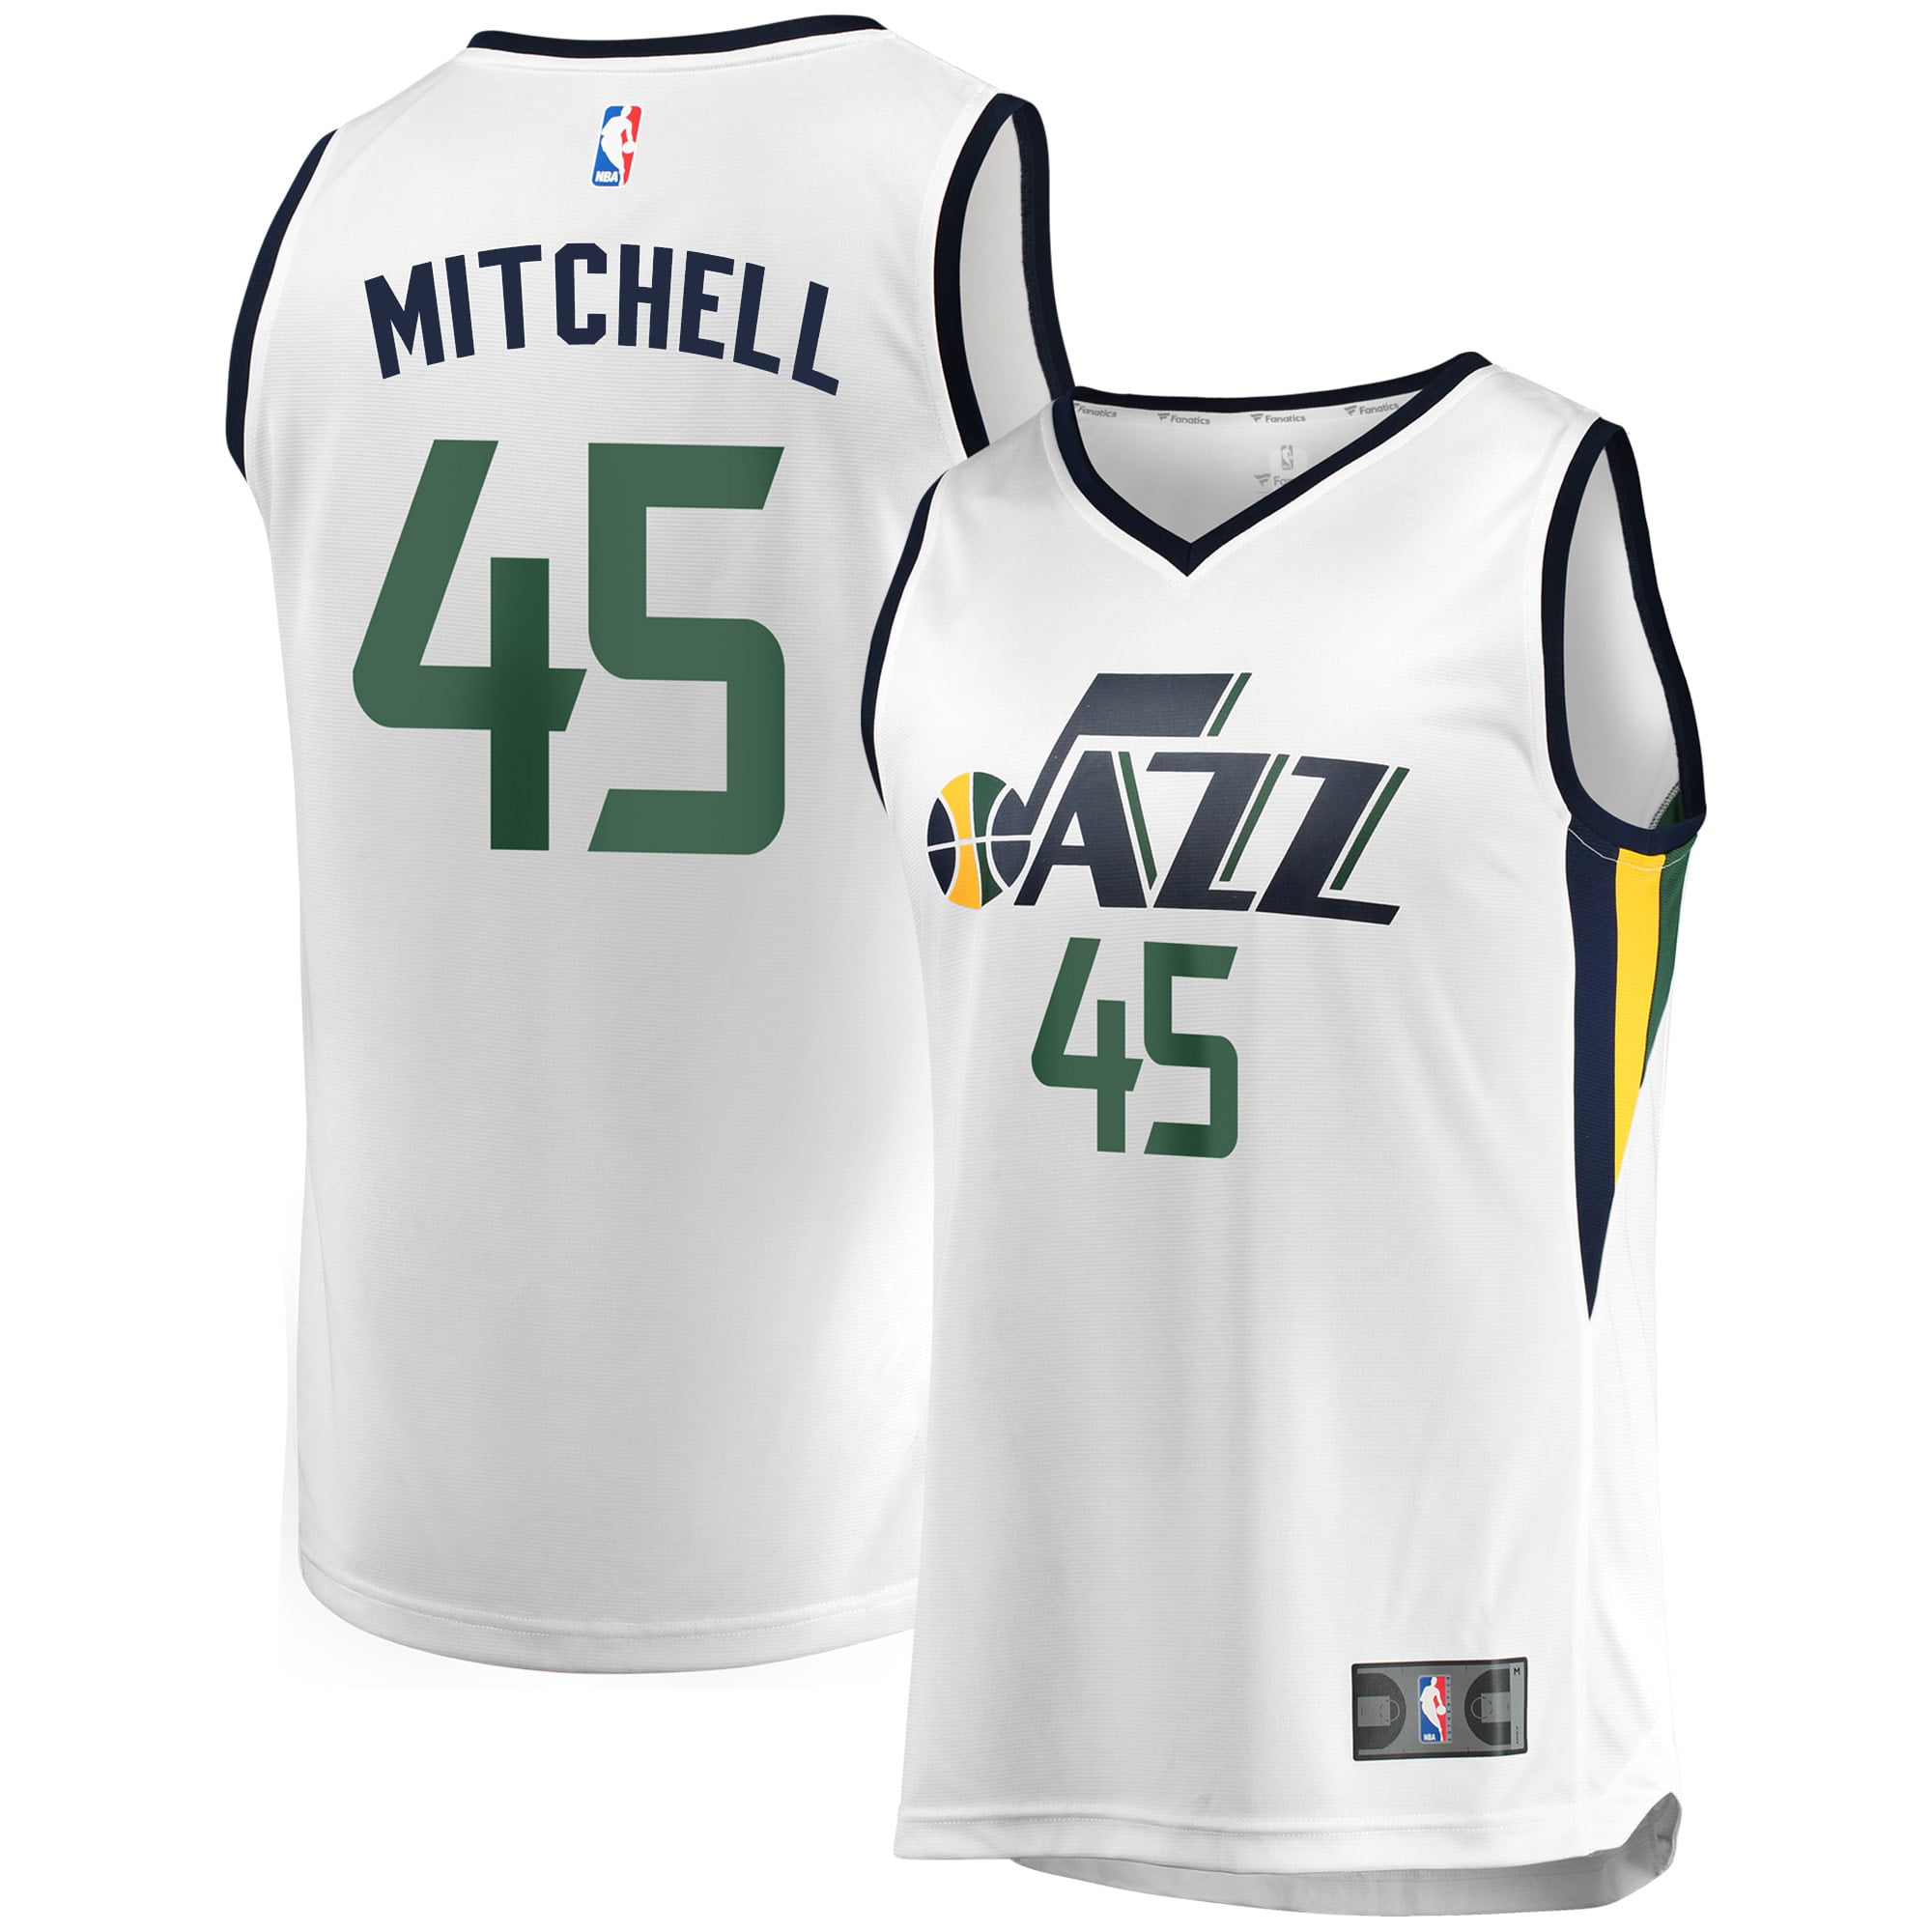 donovan mitchell youth jersey